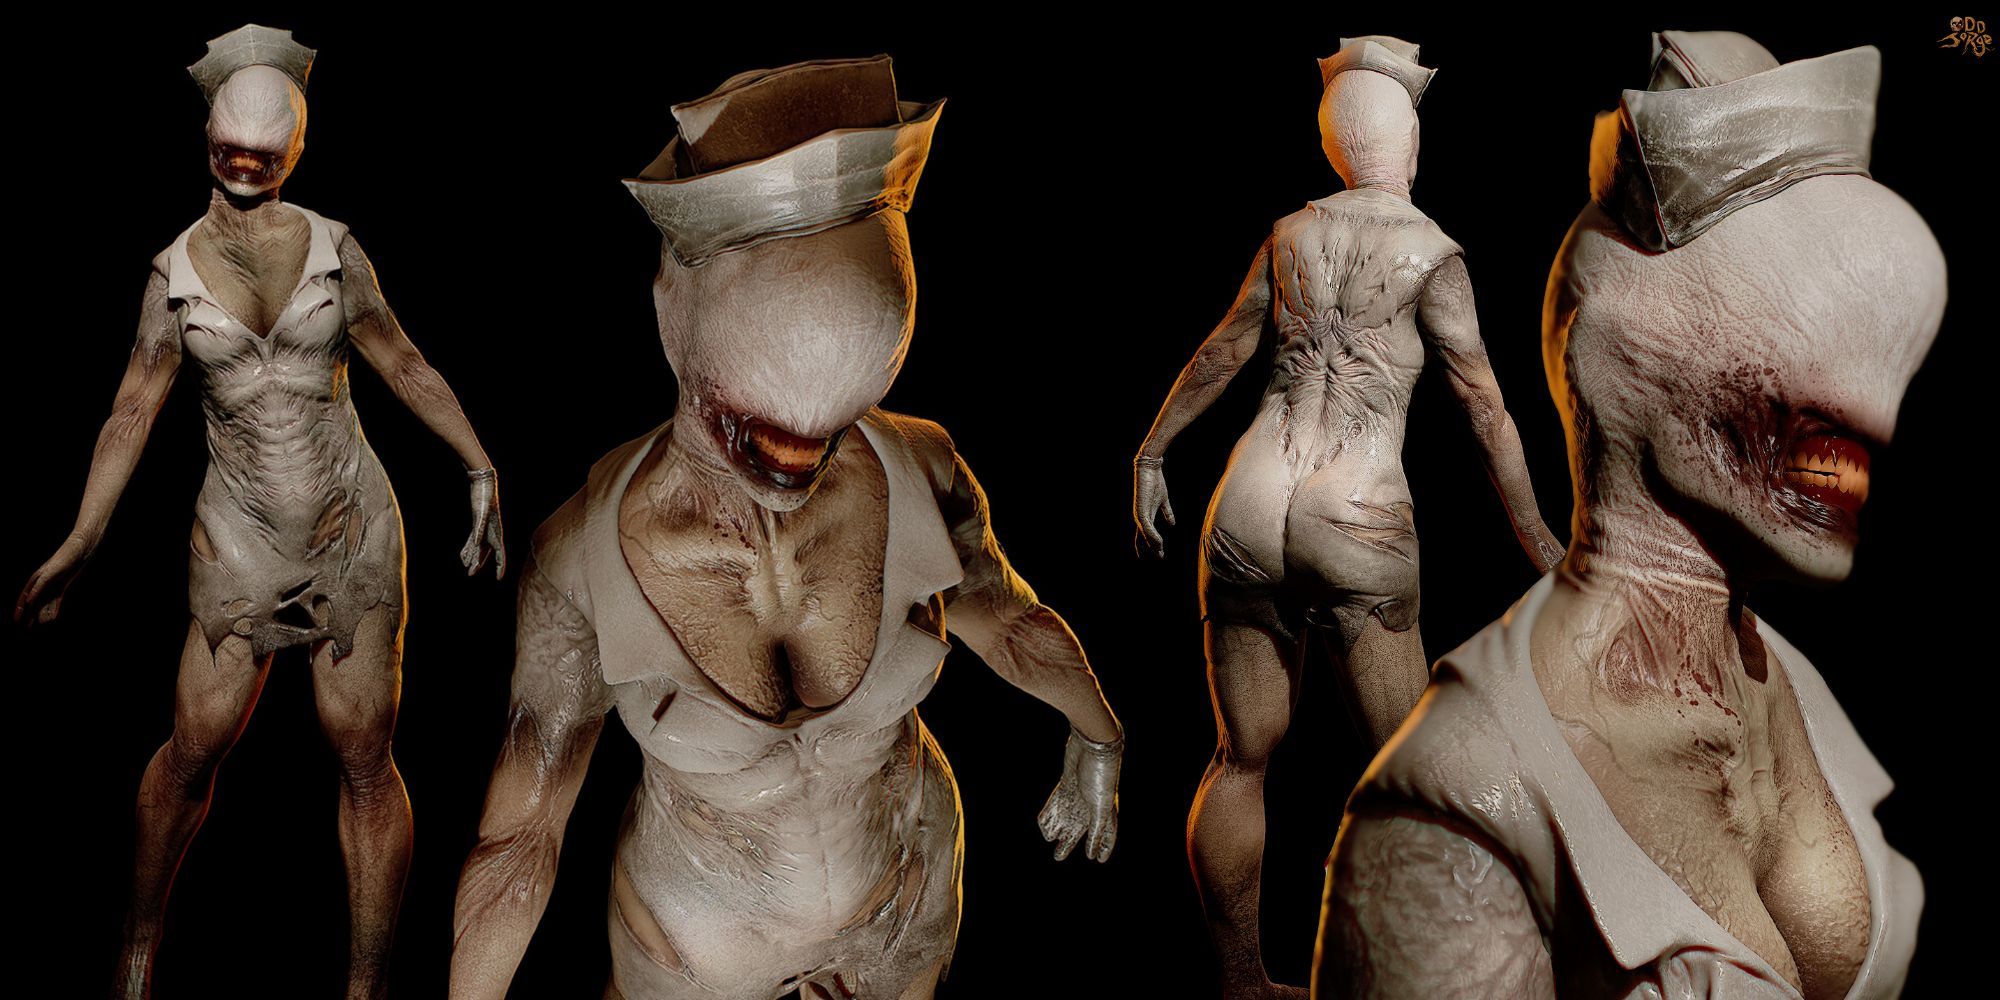 The Bubble Head Nurse from Silent Hill 2, seen from various angles